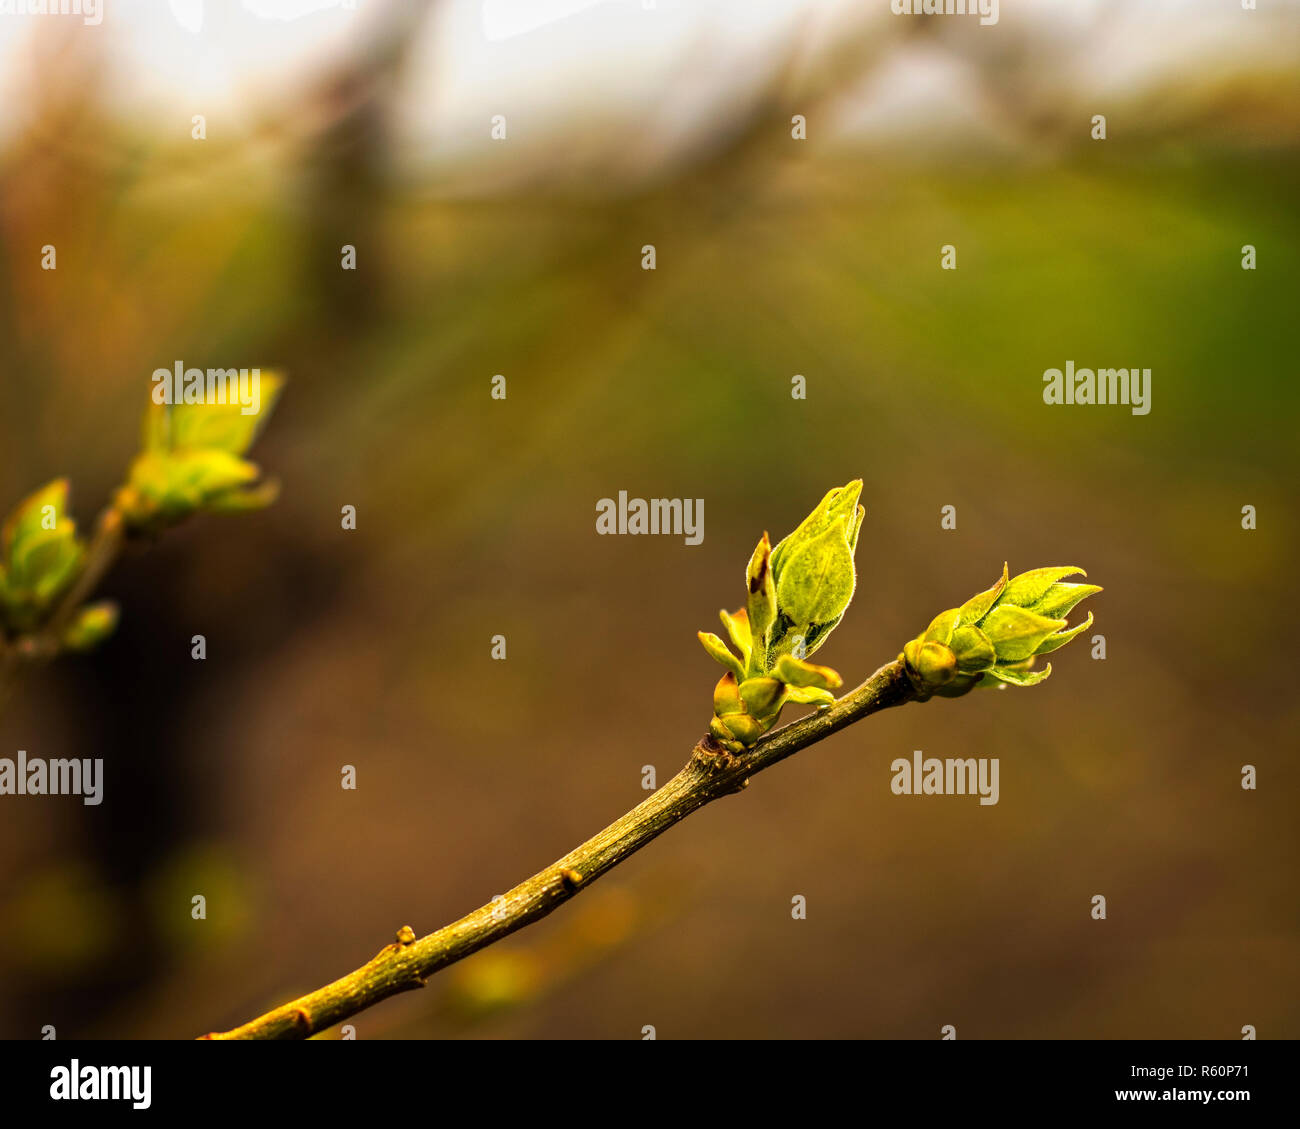 Close up View of Spring Lilac Leaf Buds With a Surreal Green, Brown and White Background Stock Photo